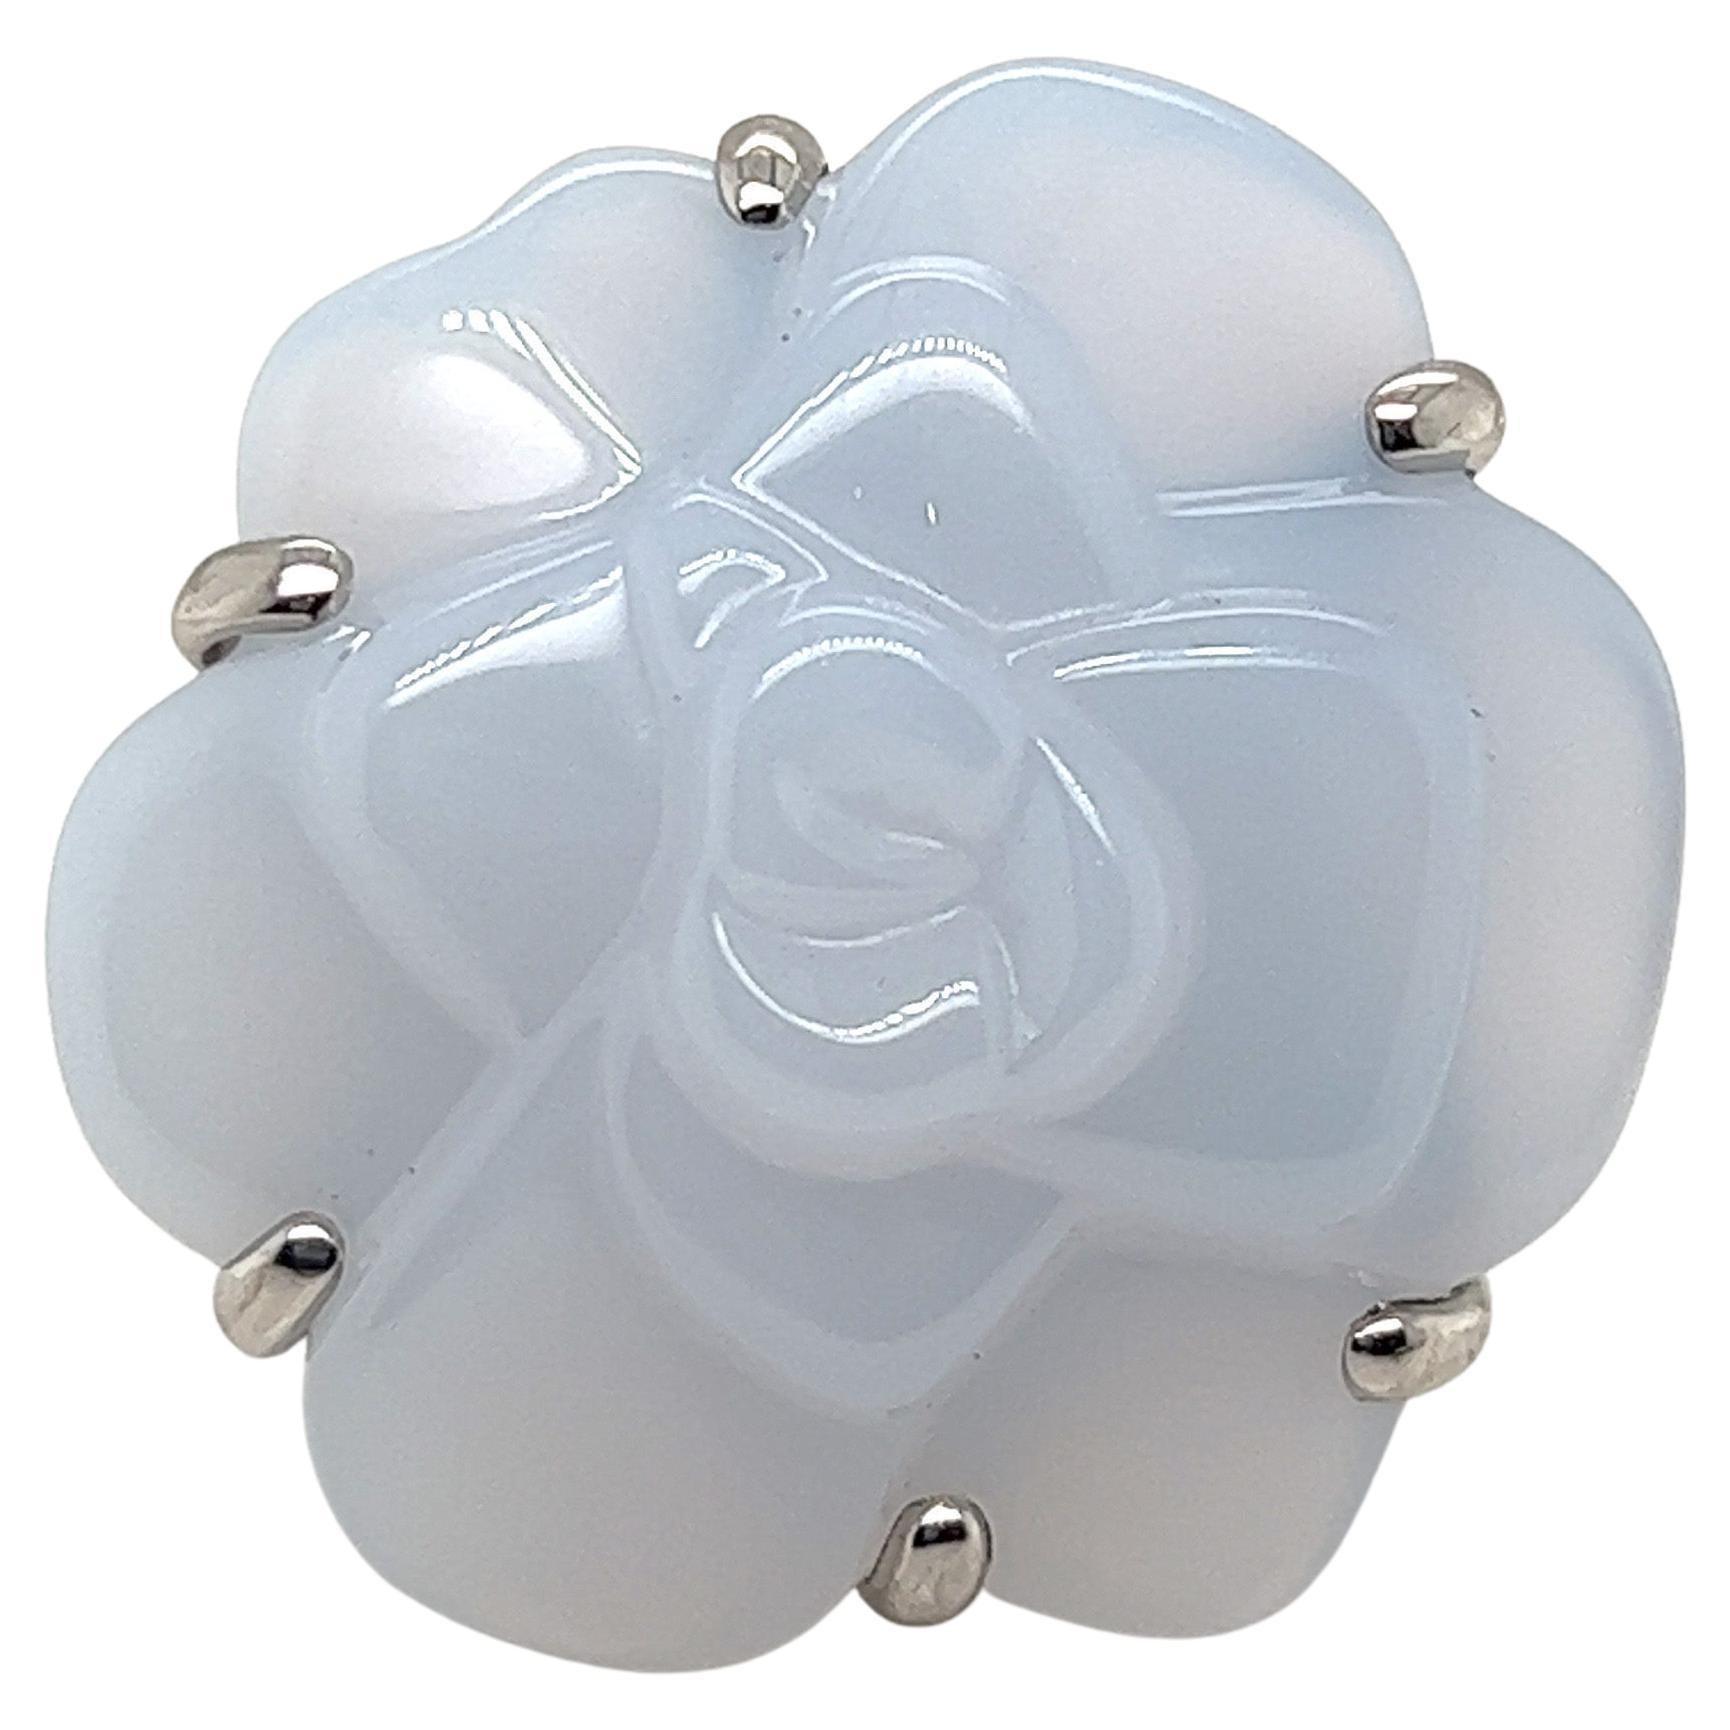 Chanel 18 Karat White Gold and Chalcedony Cocktail / Dress Ring